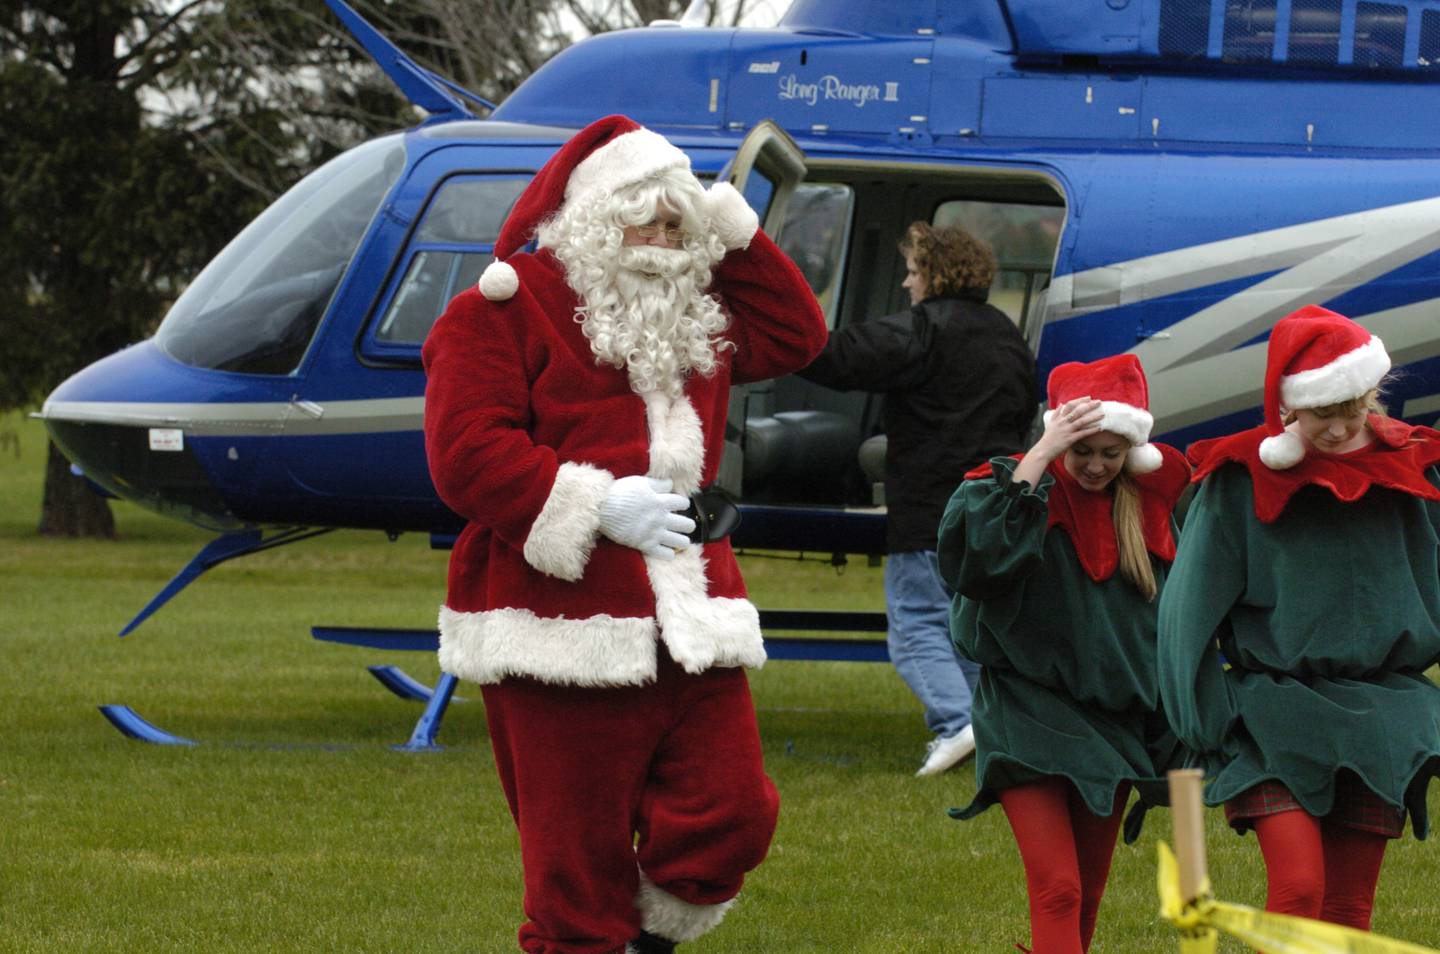 Santa and his elves arrive for Christmas 2004 in a helicopter.